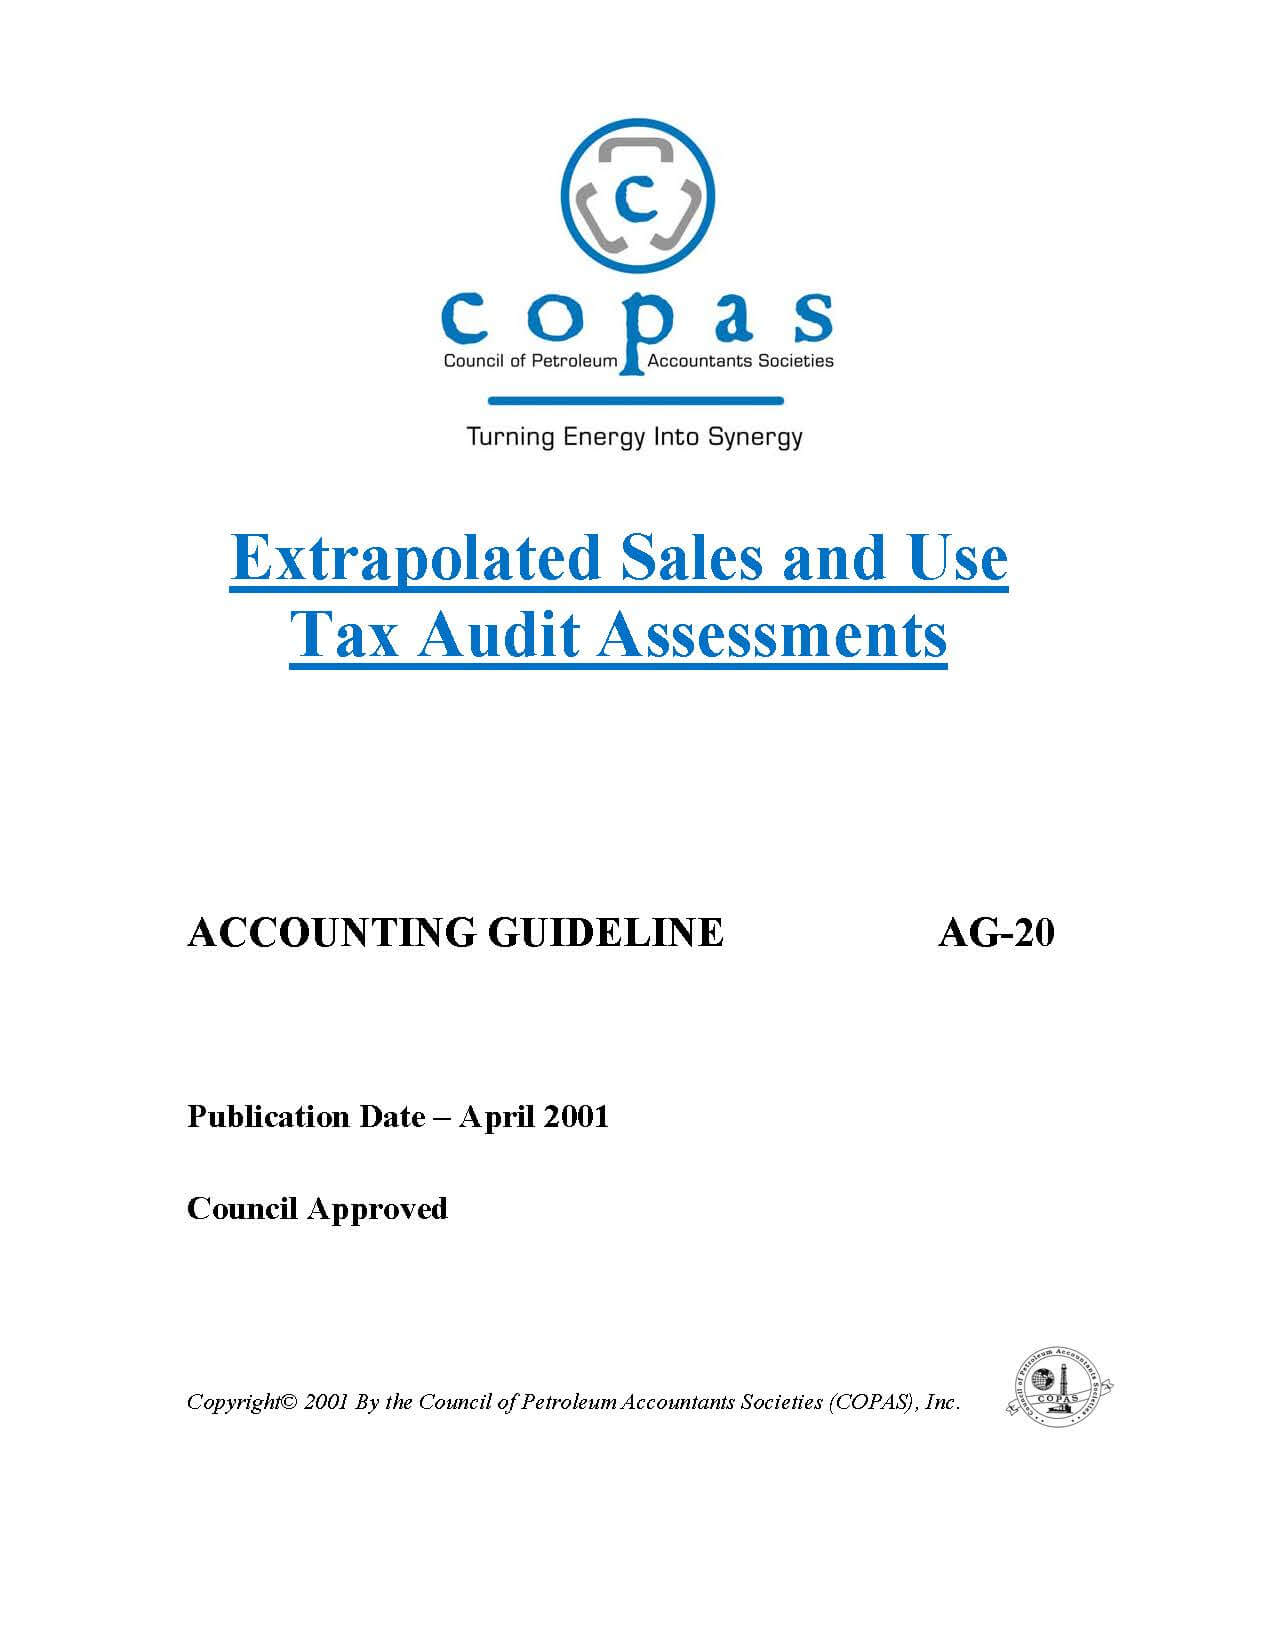 AG-20 Extrapolated Sales and Use Tax Audit Assessments - products AG - Council of Petroleum Accountants Societies